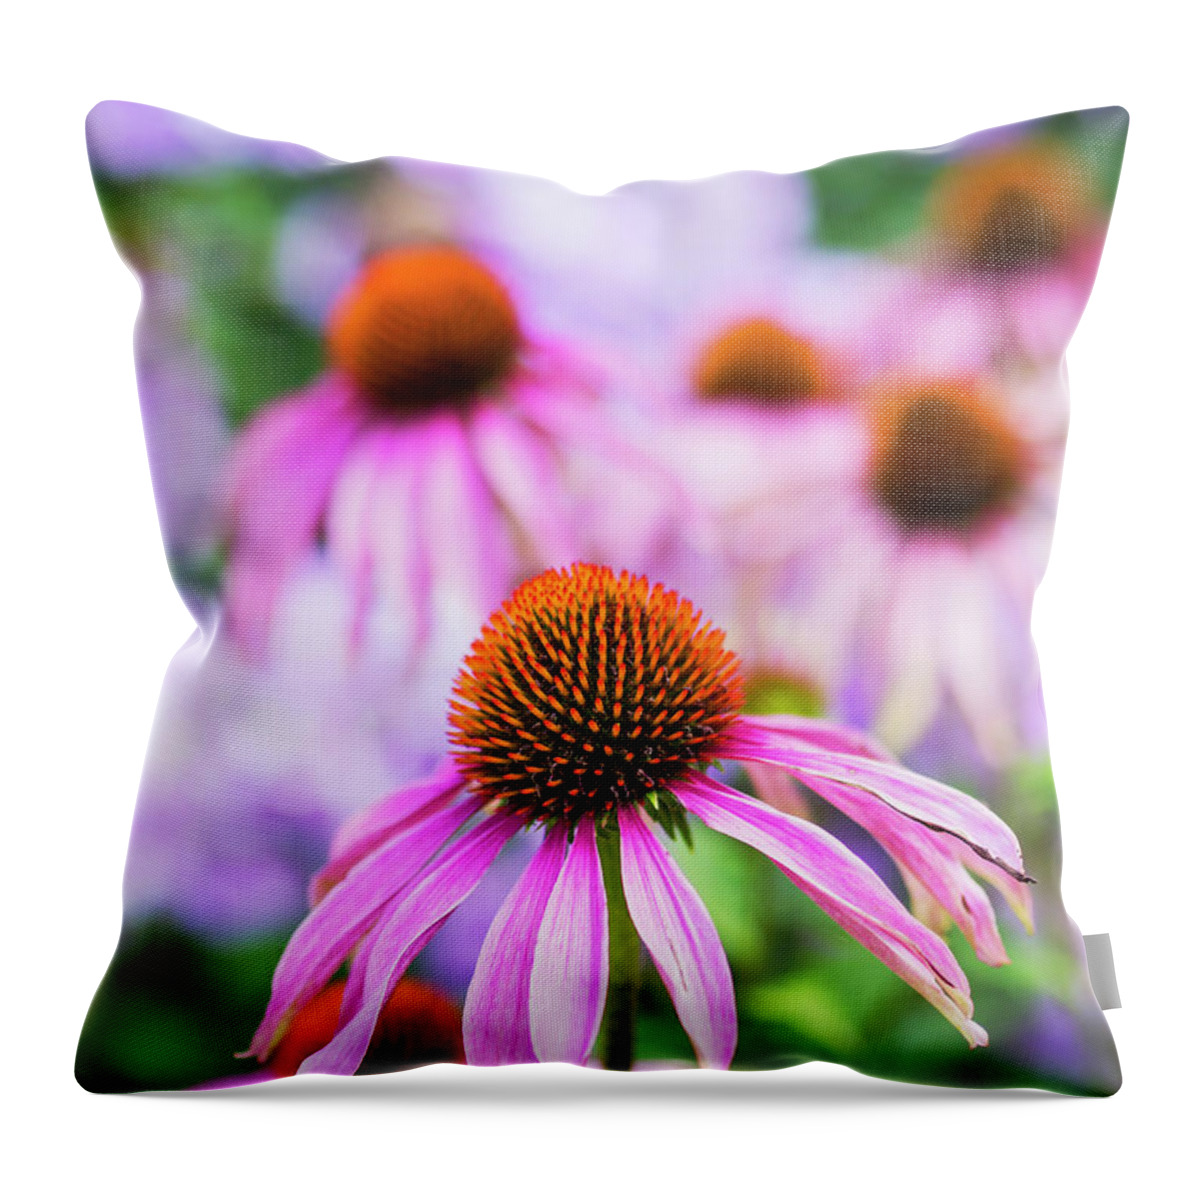 Petal Throw Pillow featuring the photograph Purple Echinacea Or Coneflowers by Doug Armand